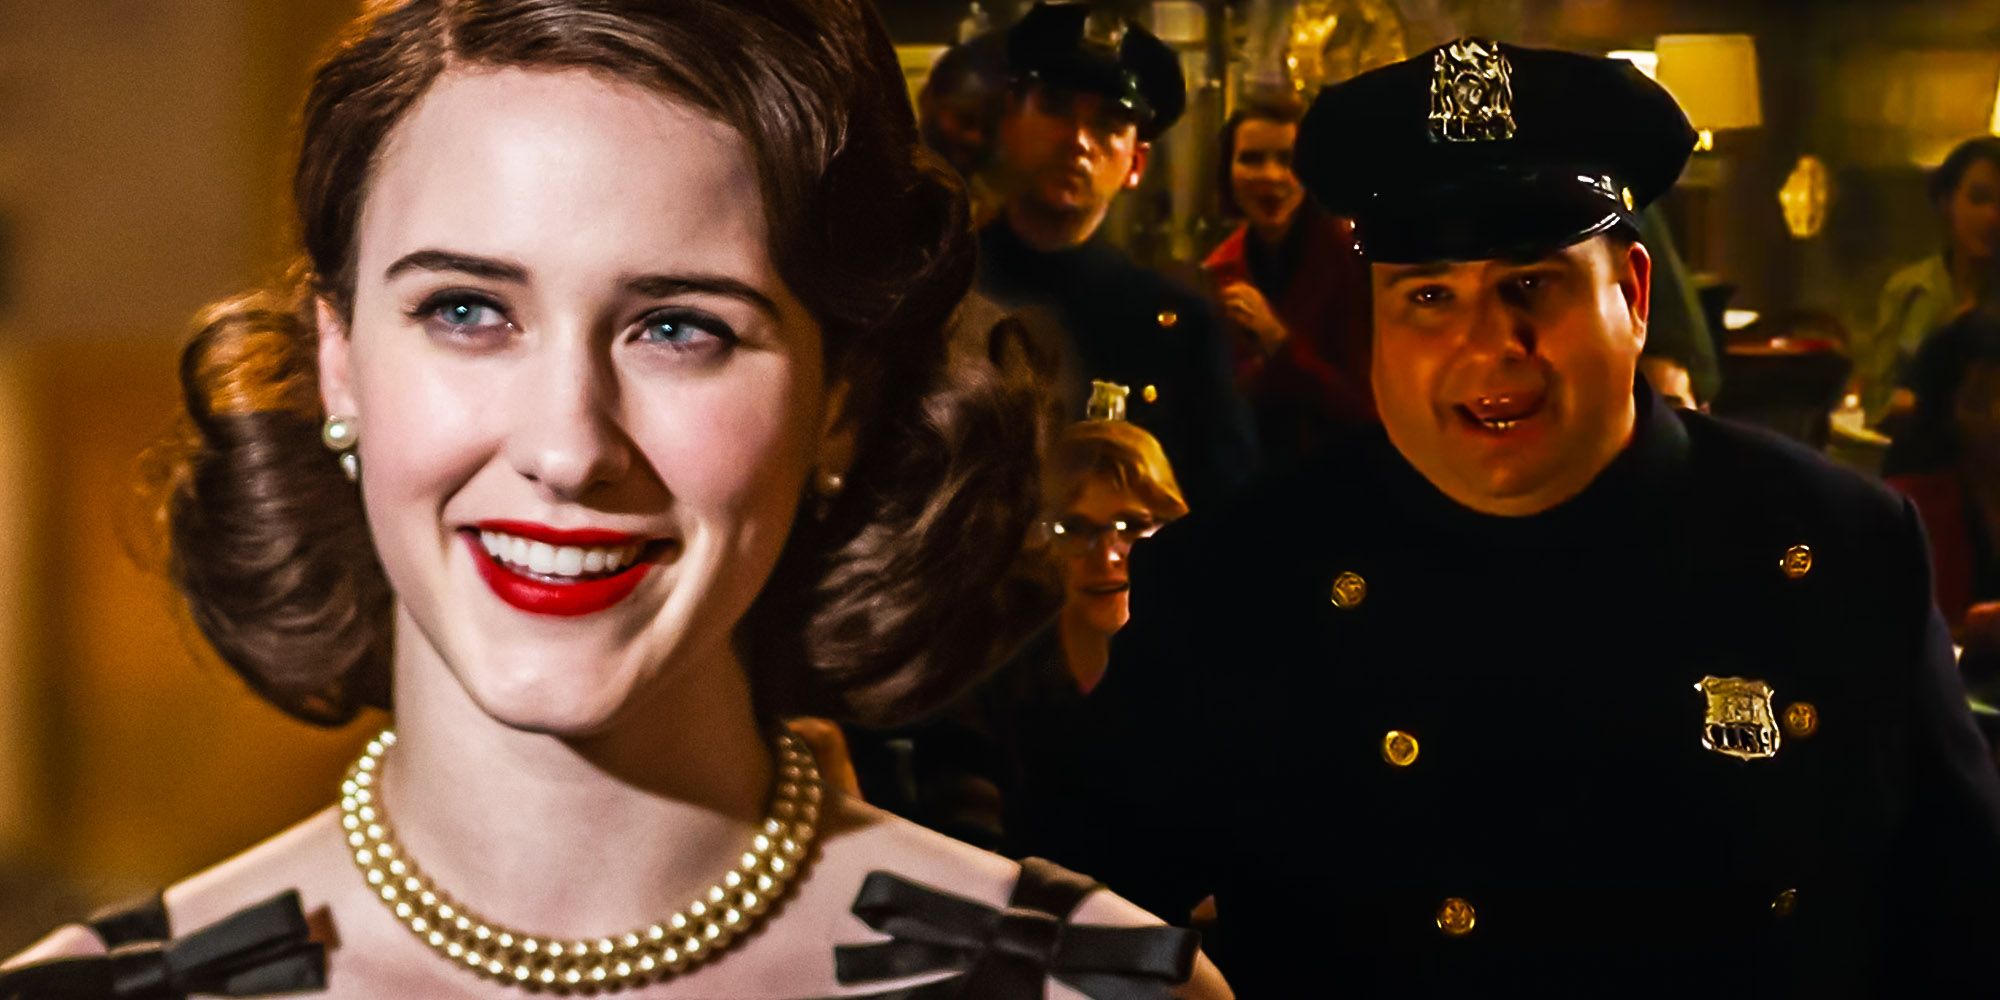 Blended image of Midge and the cops in The Marvelous Mrs. Maisel.